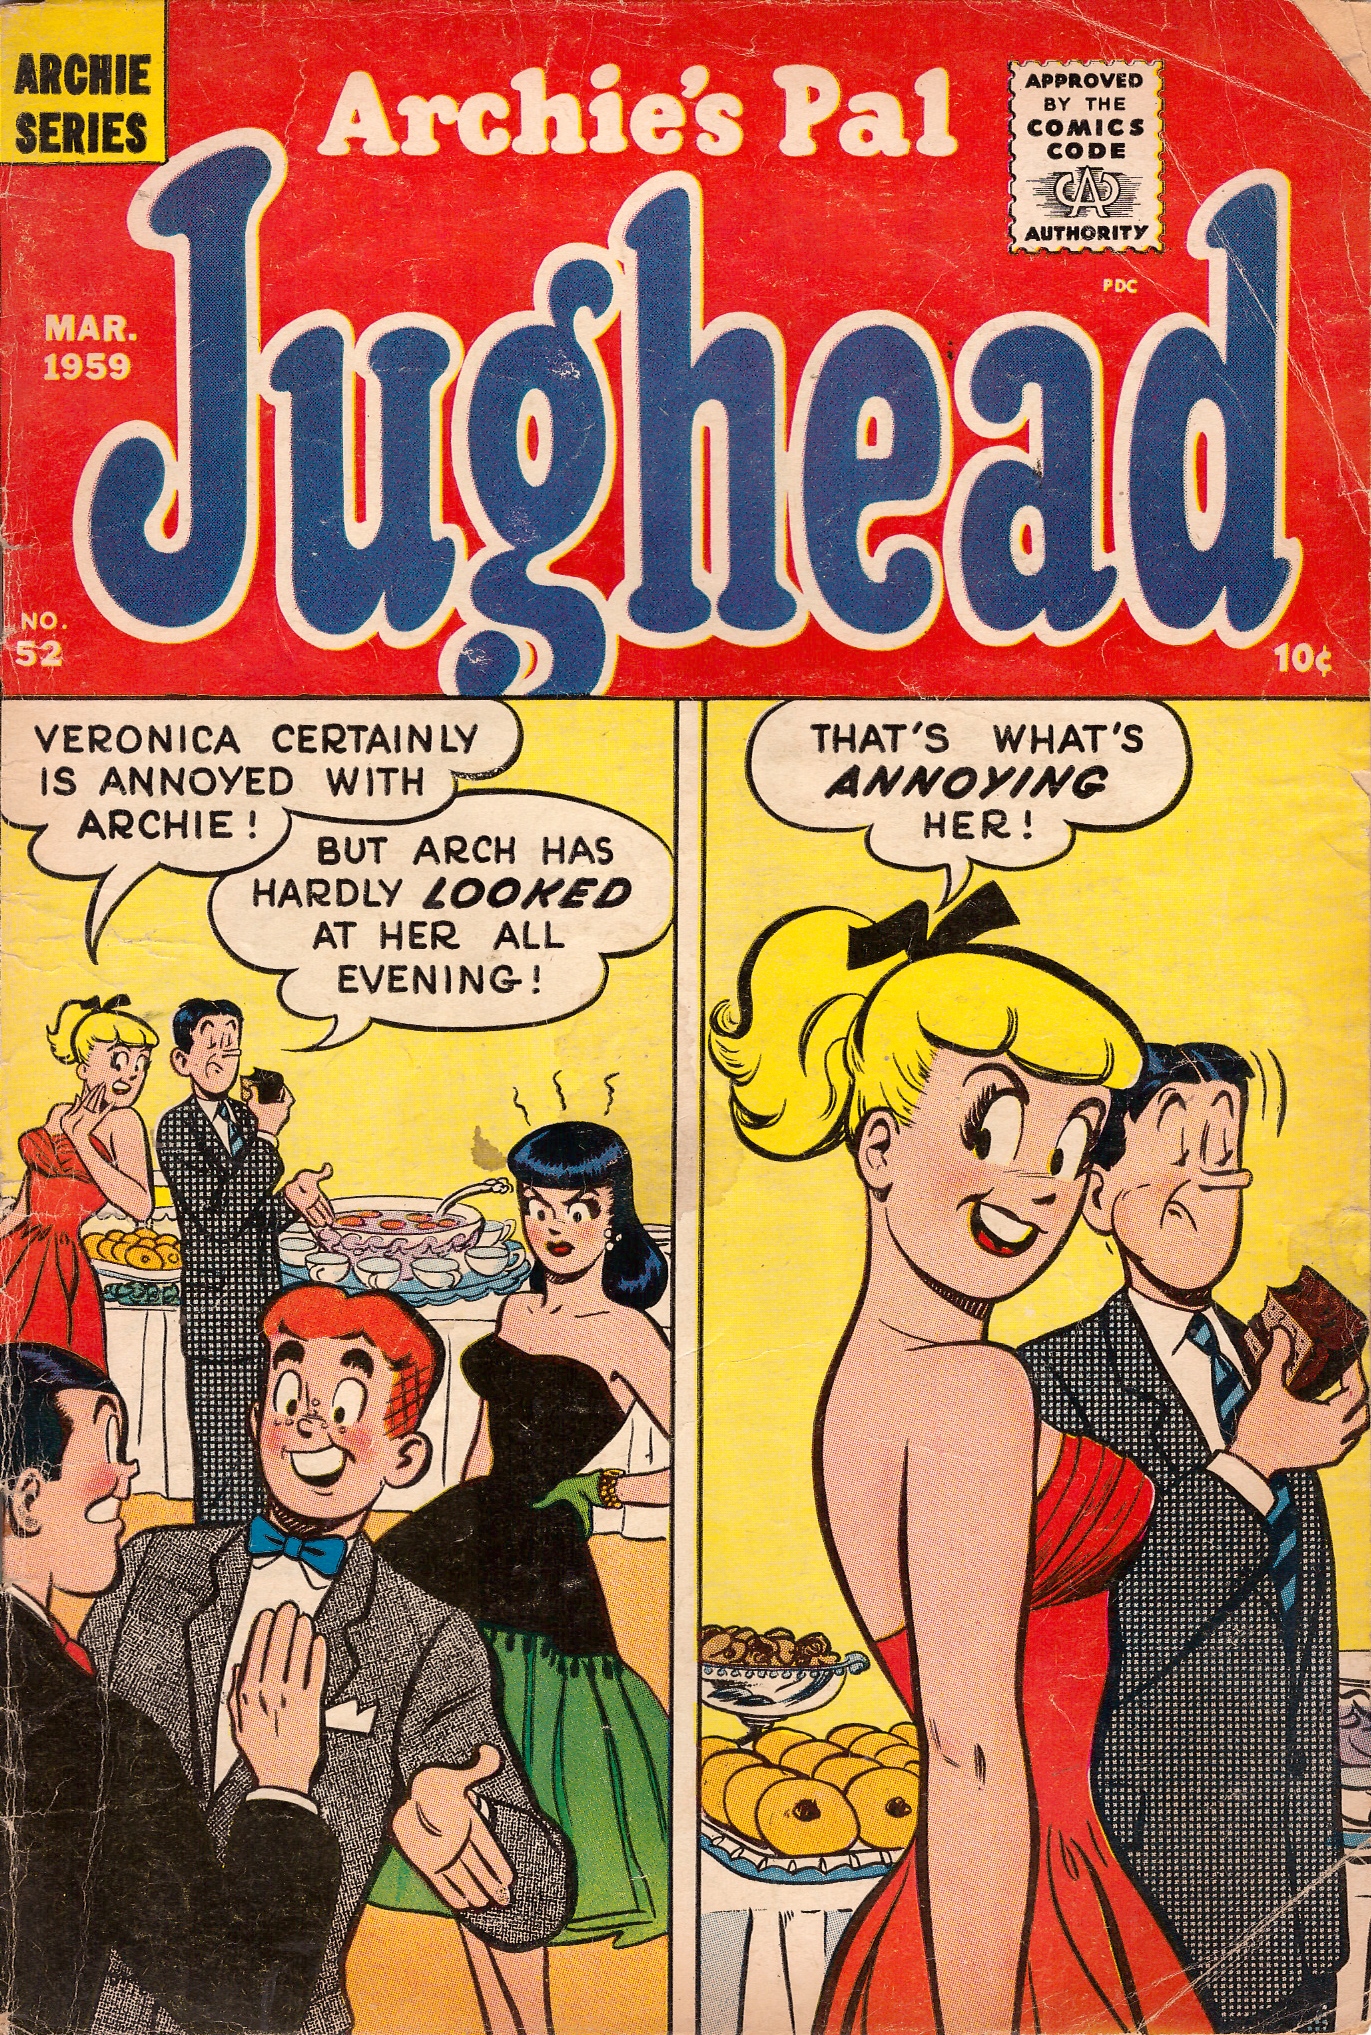 Read online Archie's Pal Jughead comic -  Issue #52 - 1